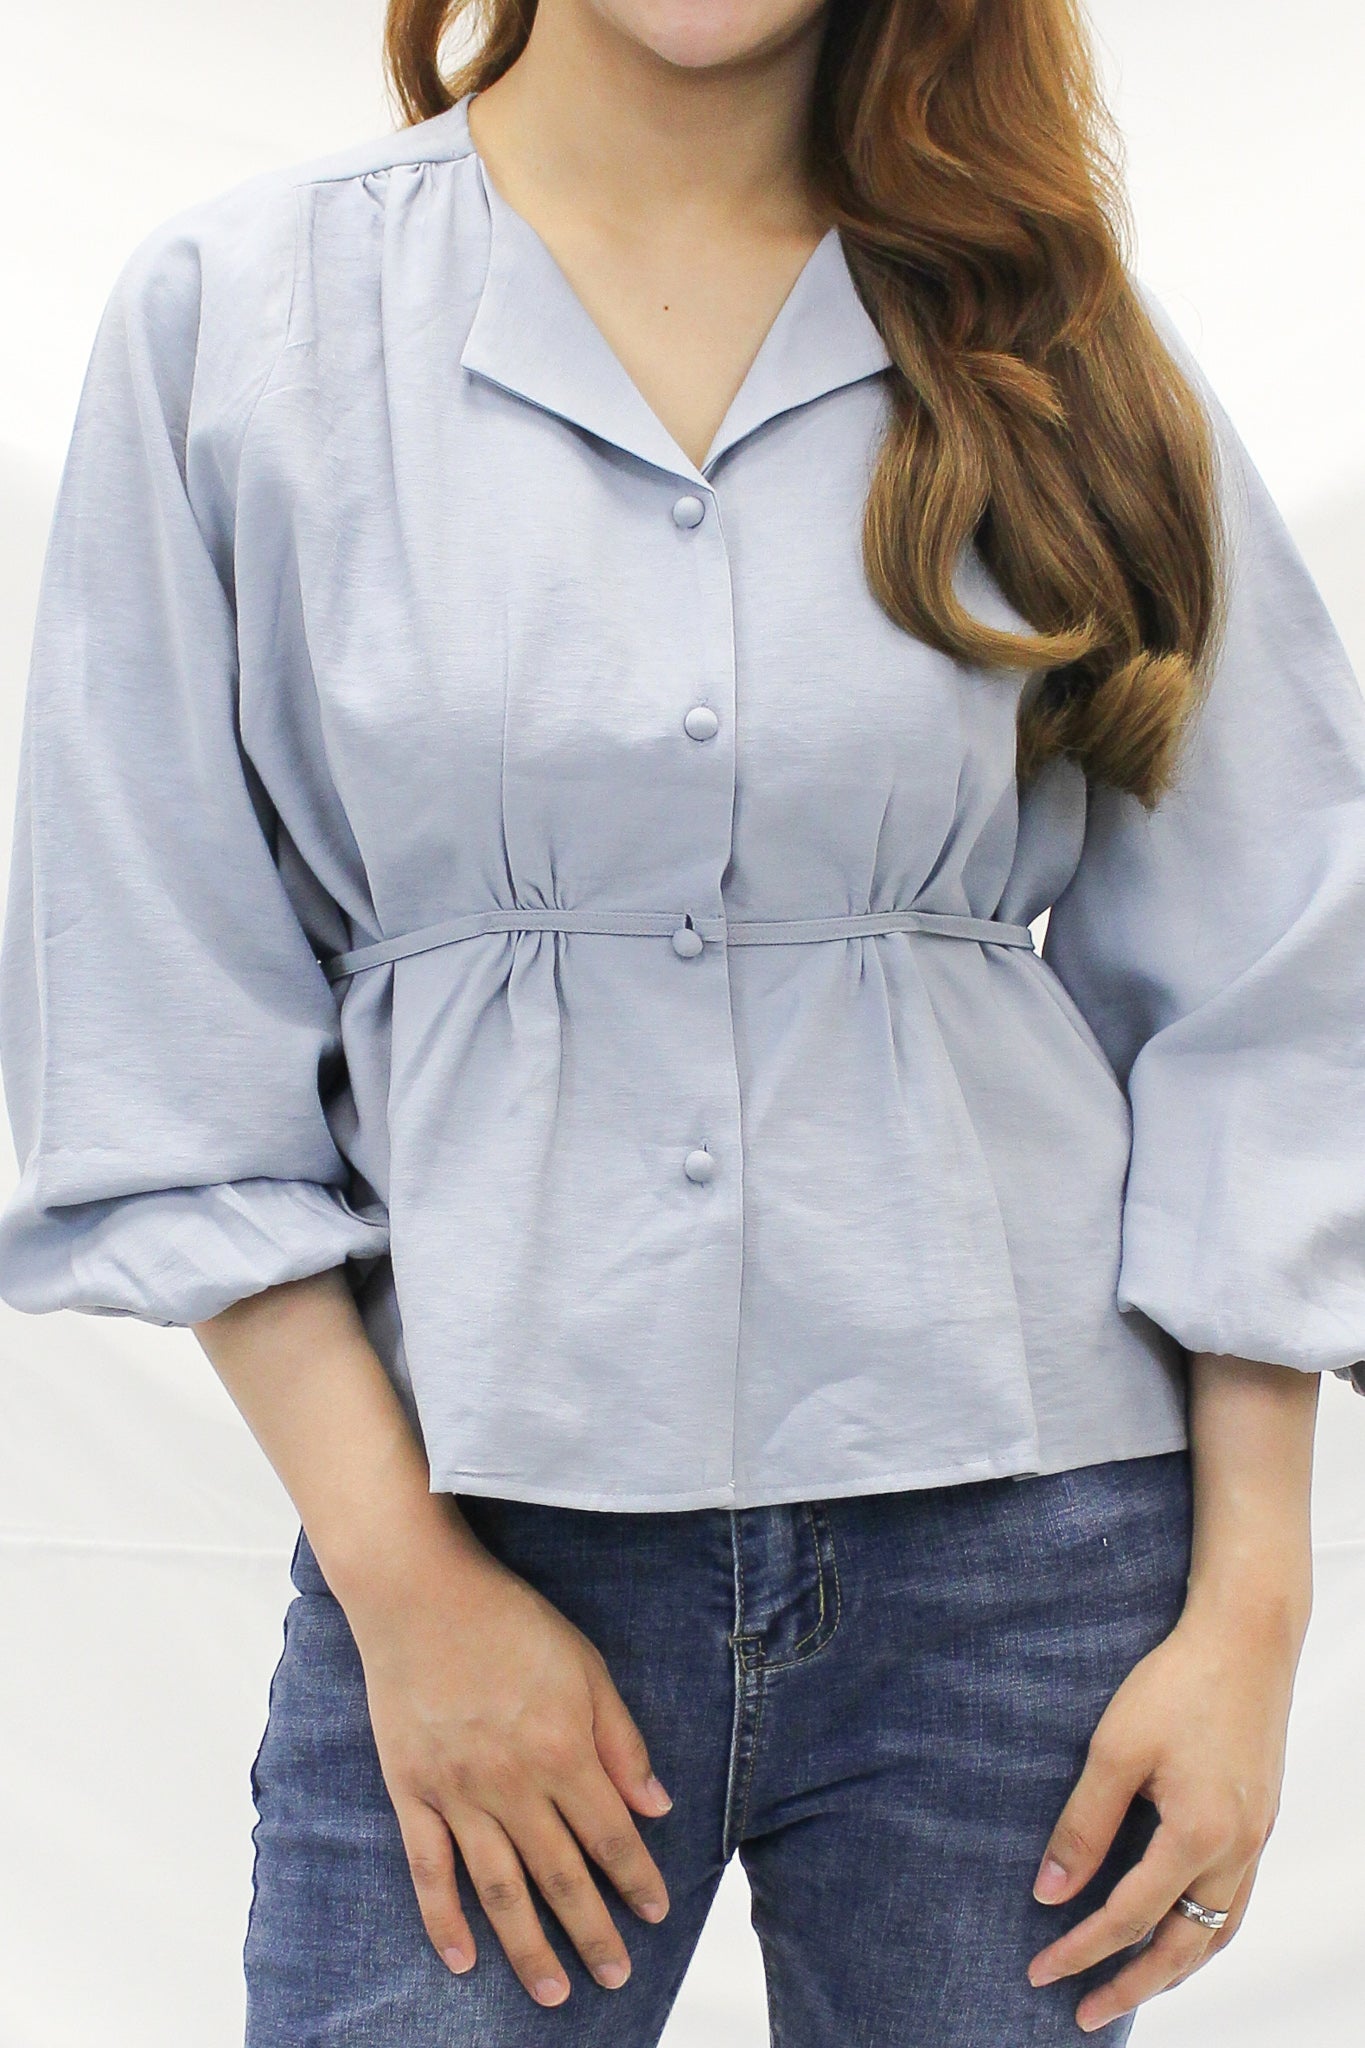 A peplum top with waist tie to bring in your waist. Complete with puffy long sleeves, perfect for workwear